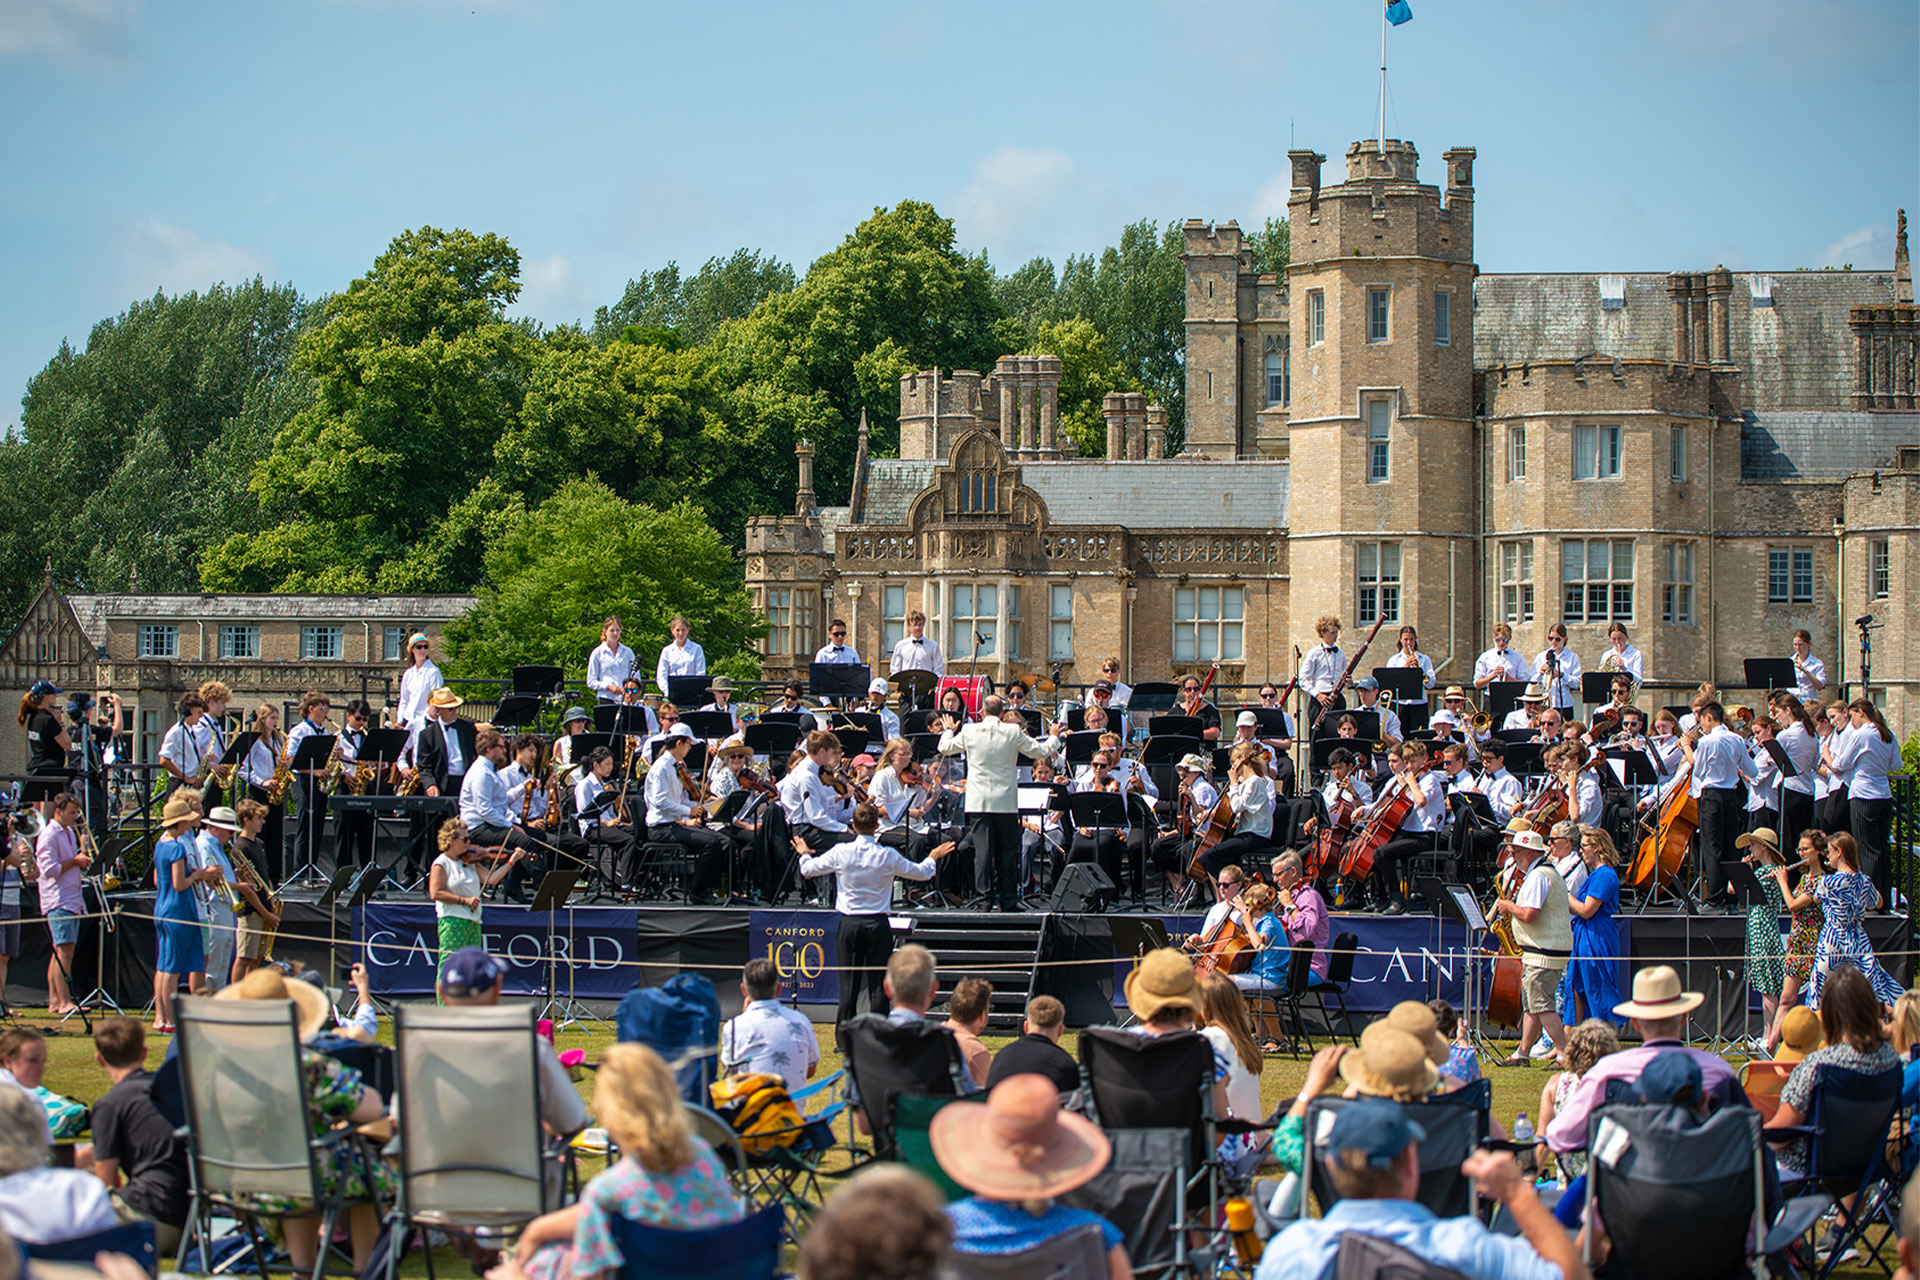 Canford School's 'Prom in the Park' Garden Party